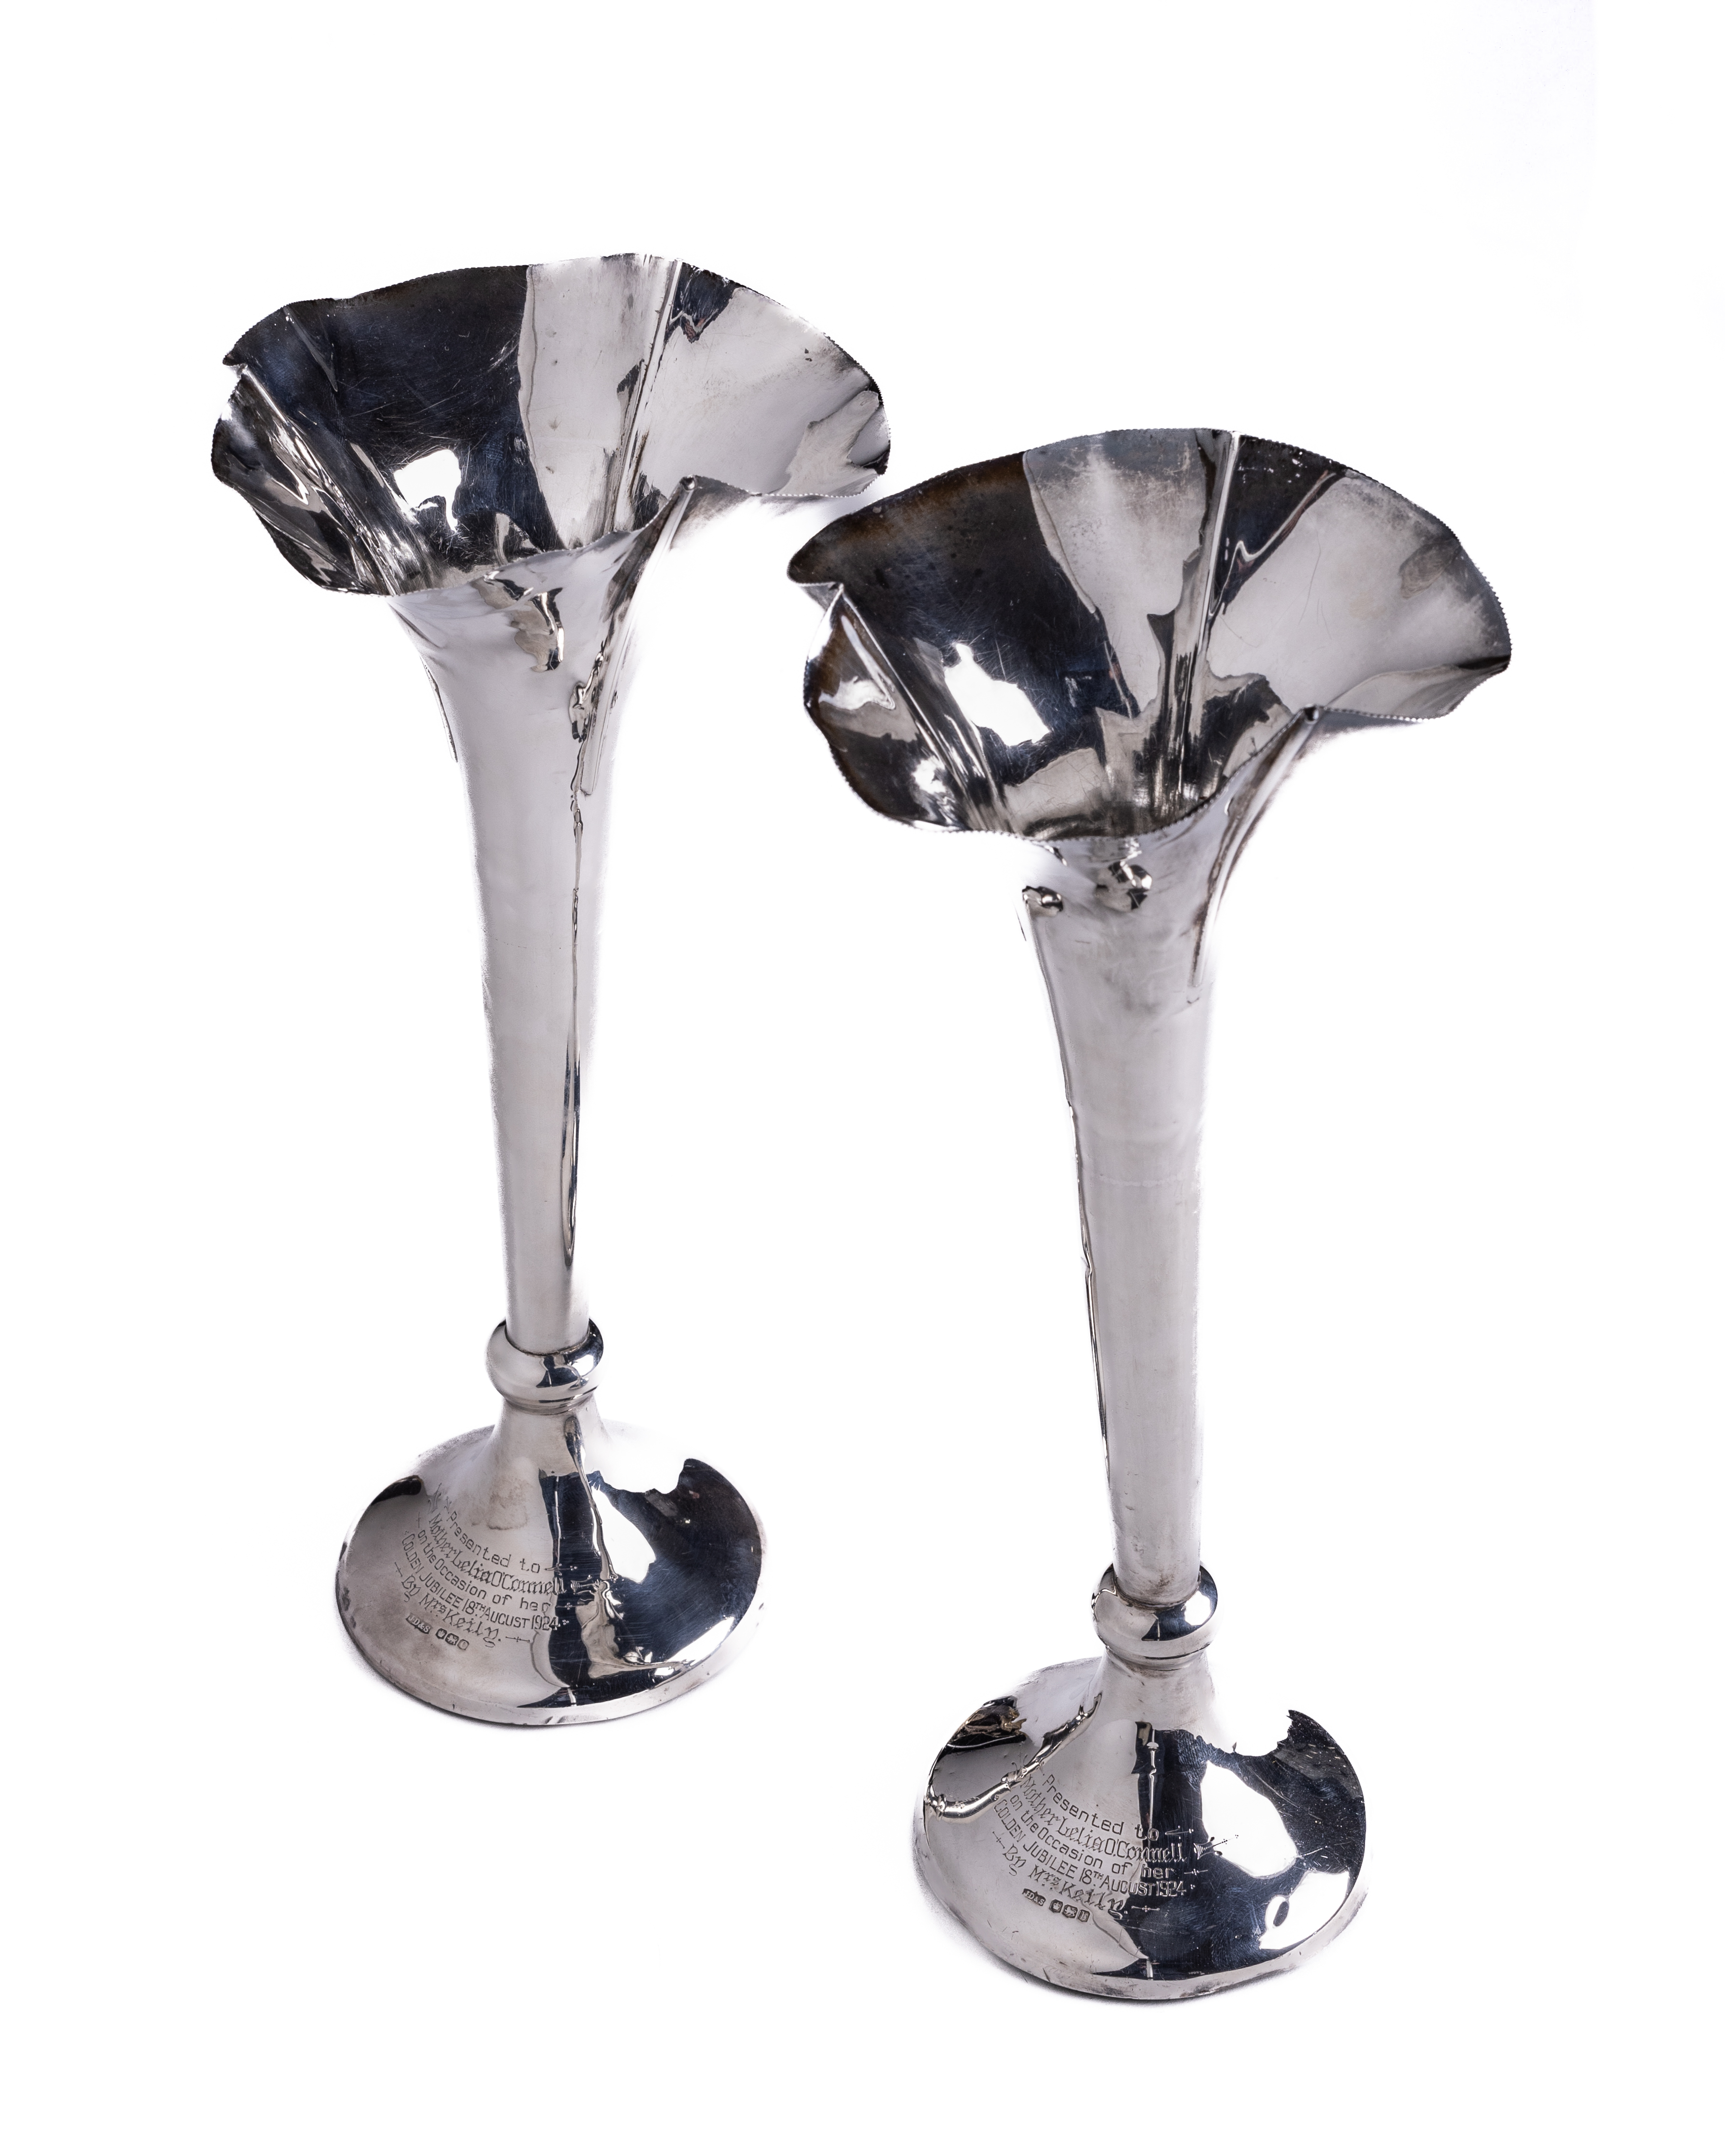 A pair of large trumpet design English silver Vases, by James Dixon and Sons, Sheffield, c. 1922,